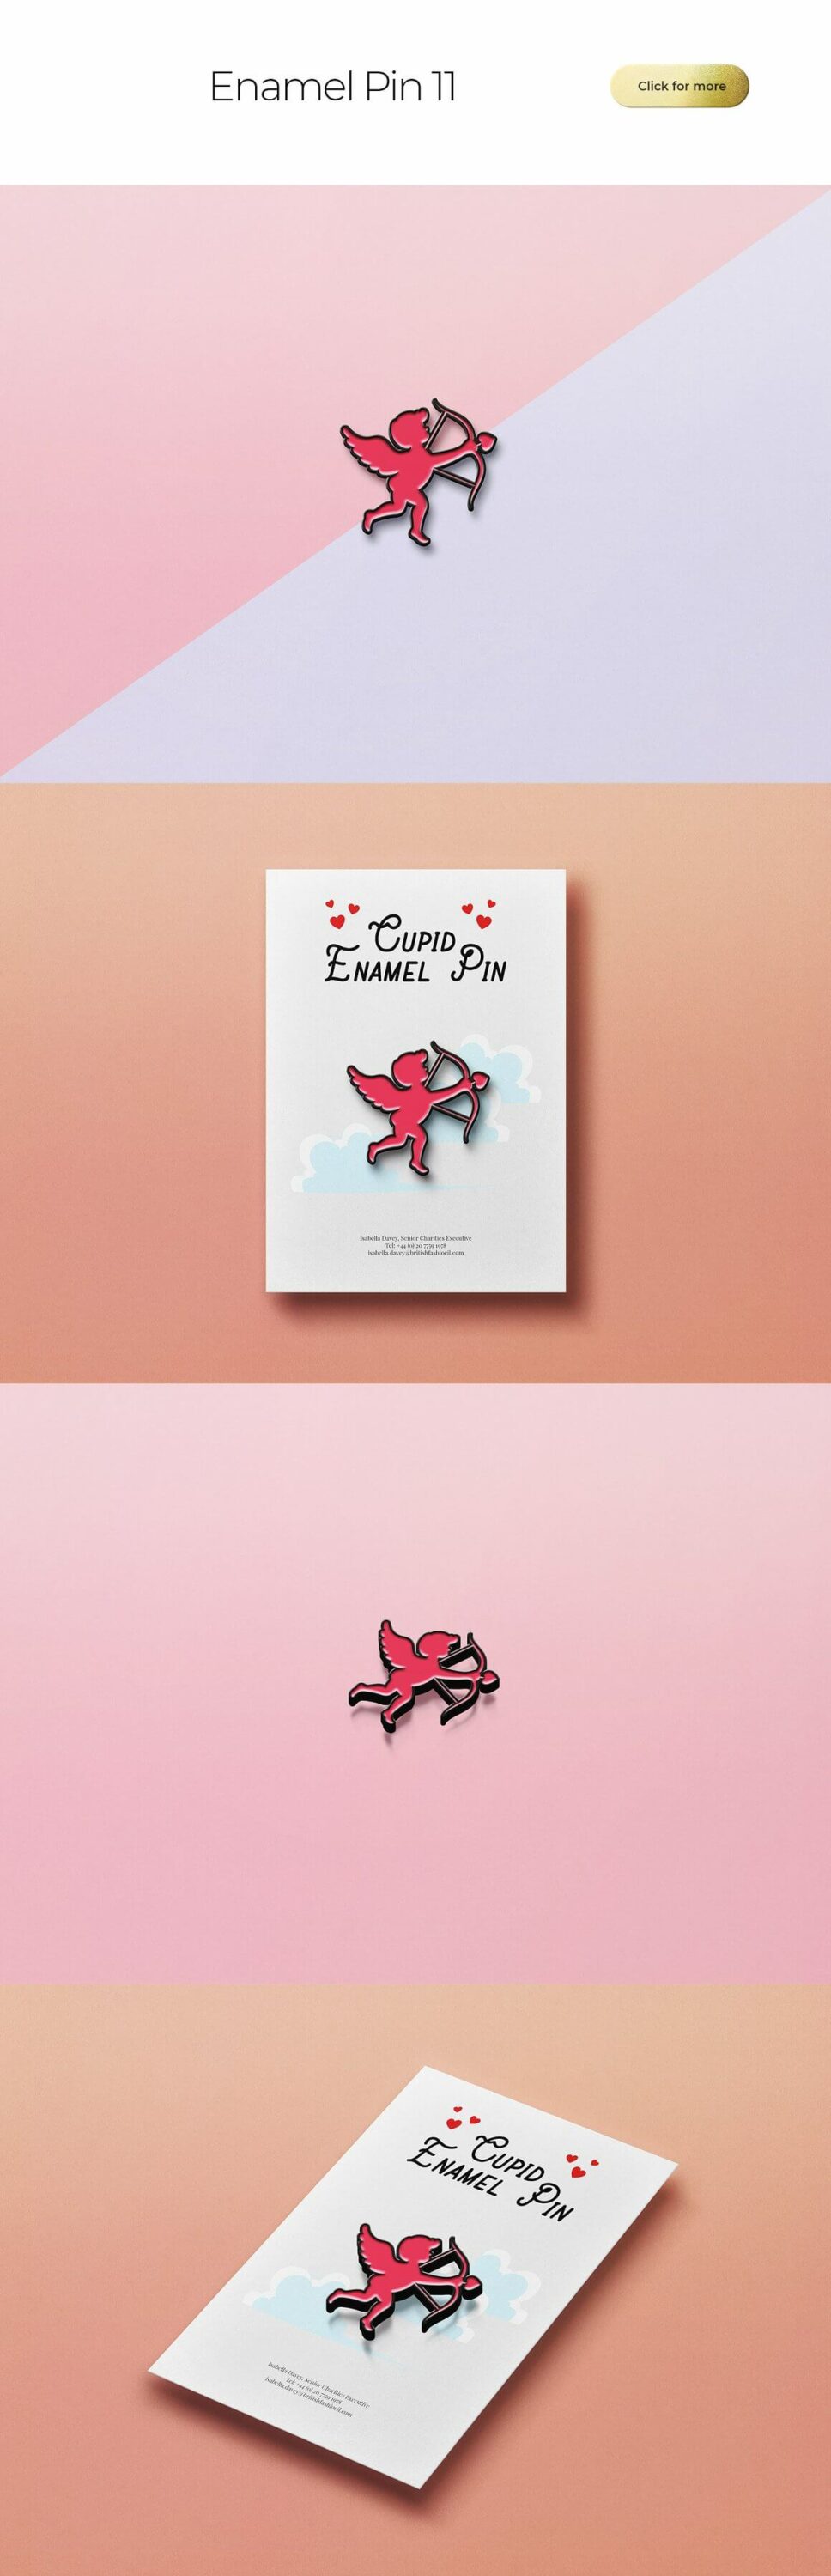 Cupid enamel pin on the pink and blue backgrounds.